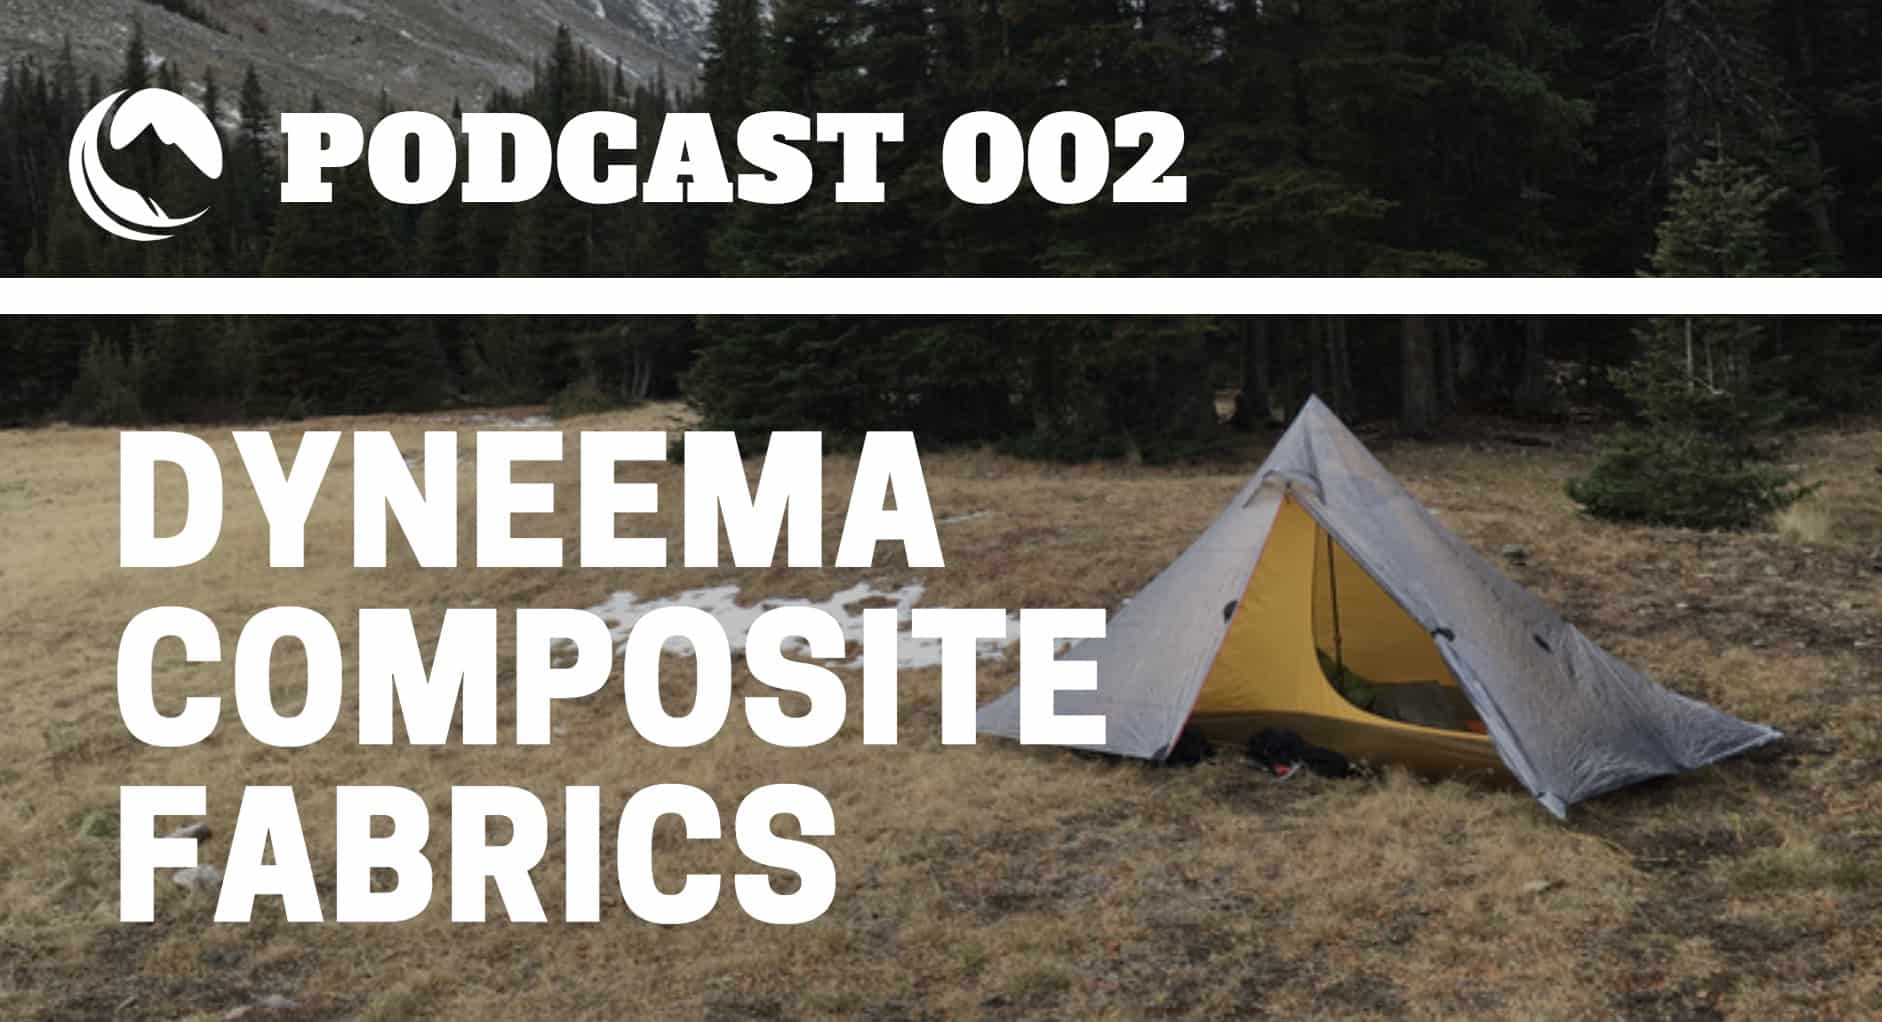 Podcast 002 | Dyneema Composite Fabrics - Backpacking Light